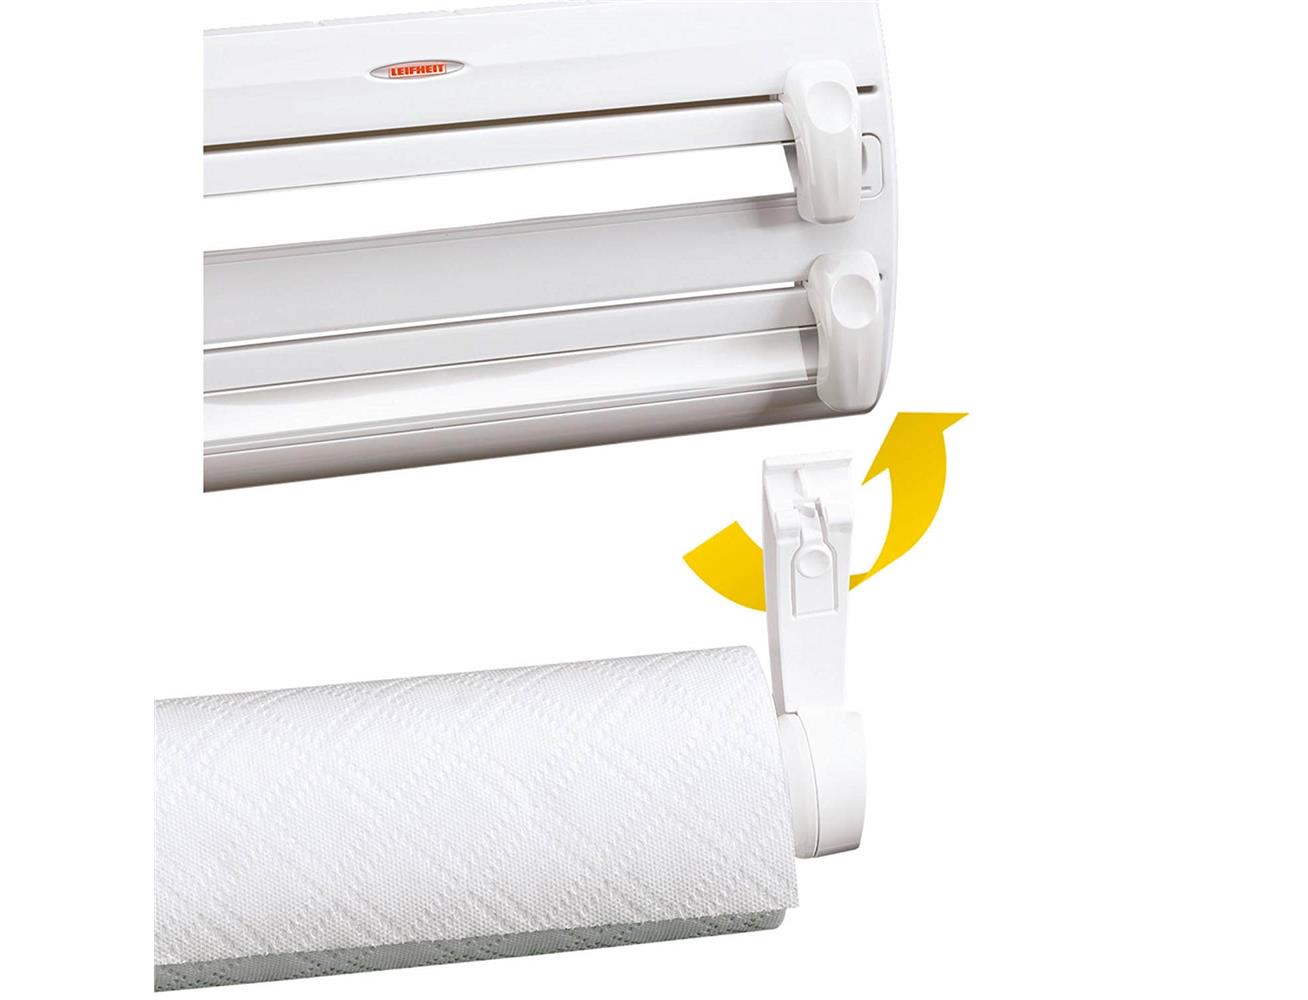 4-In-1 Wall-Mount Paper Towel Holder | Plastic Wrap And ...